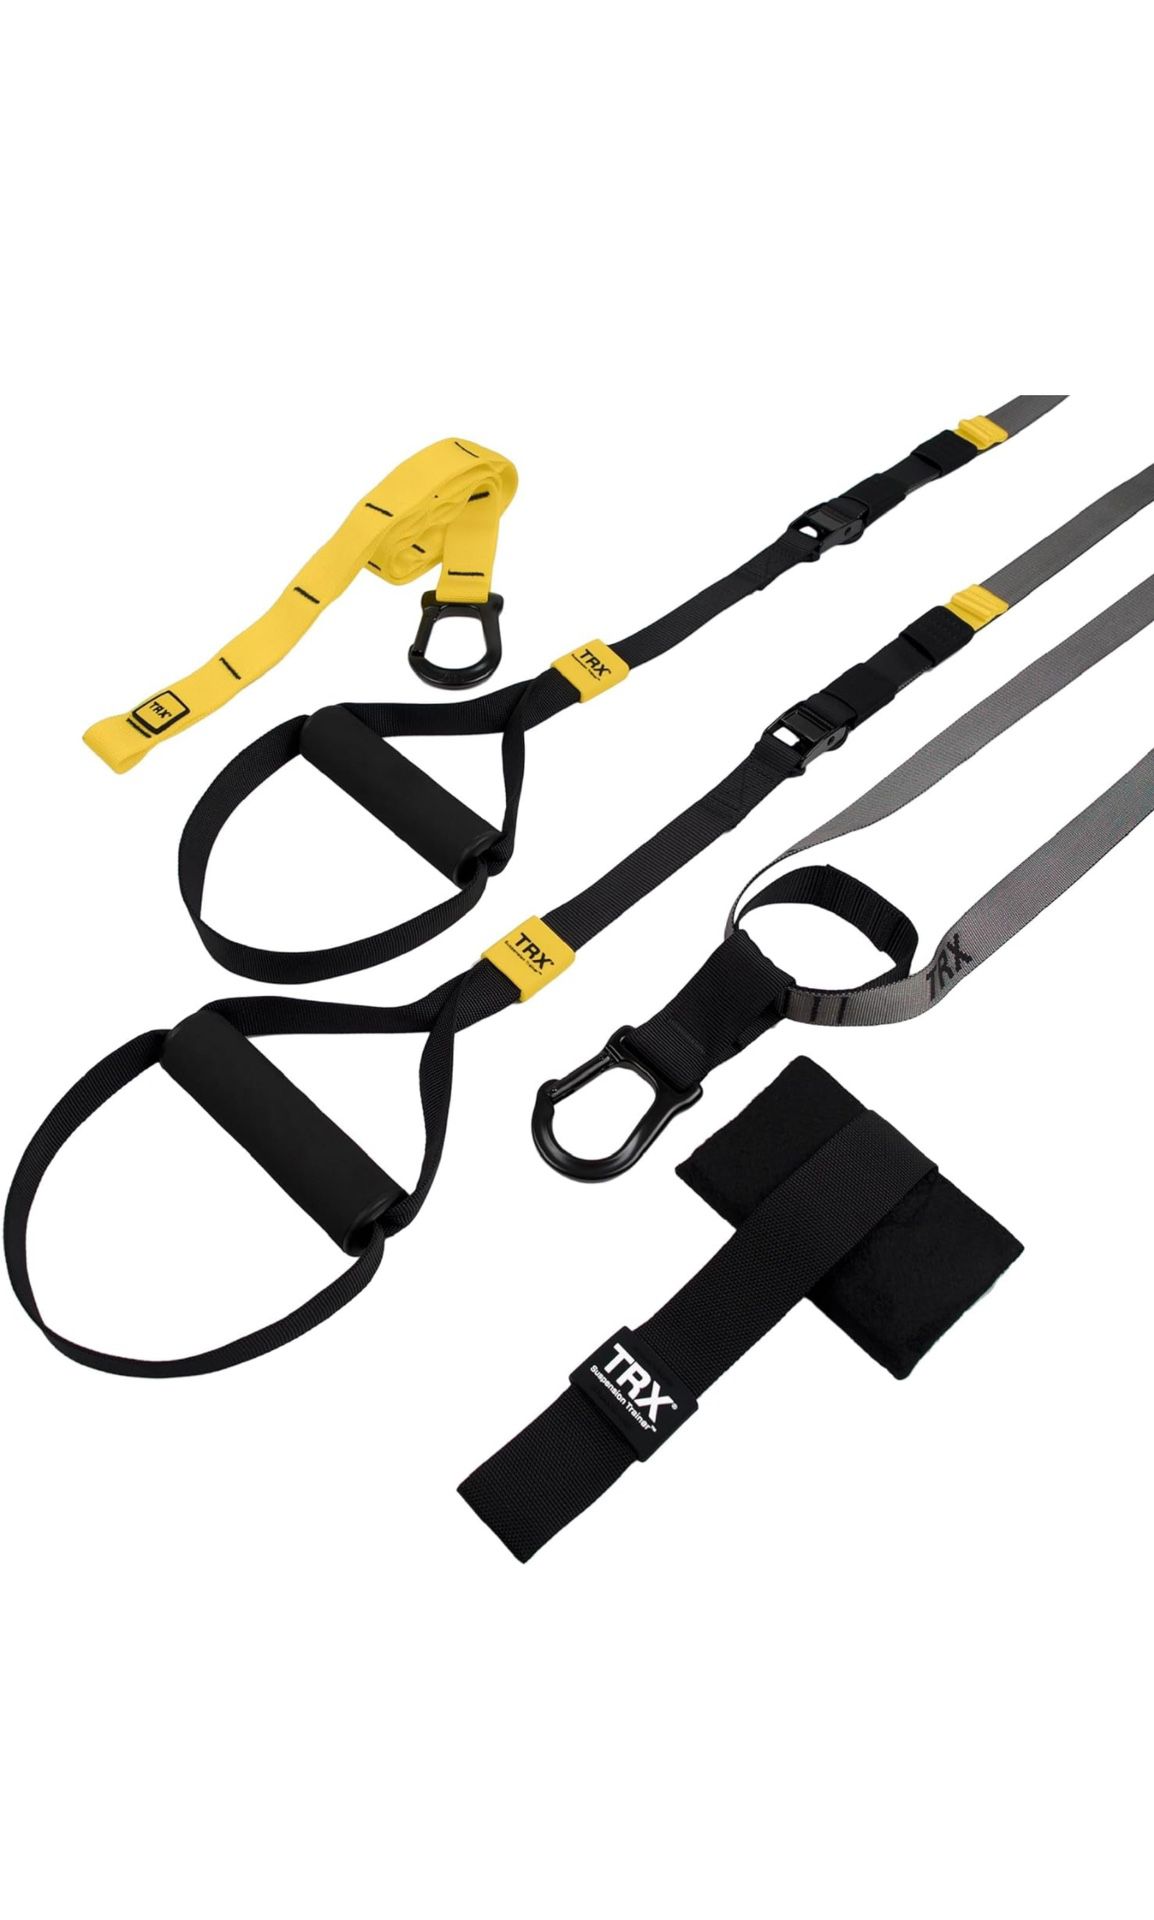 TRX GO Suspension Trainer System, Full-Body Workout for All Levels & Goals, Lightweight & Portable, Fast, Fun & Effective Workouts, Home Gym Equipment